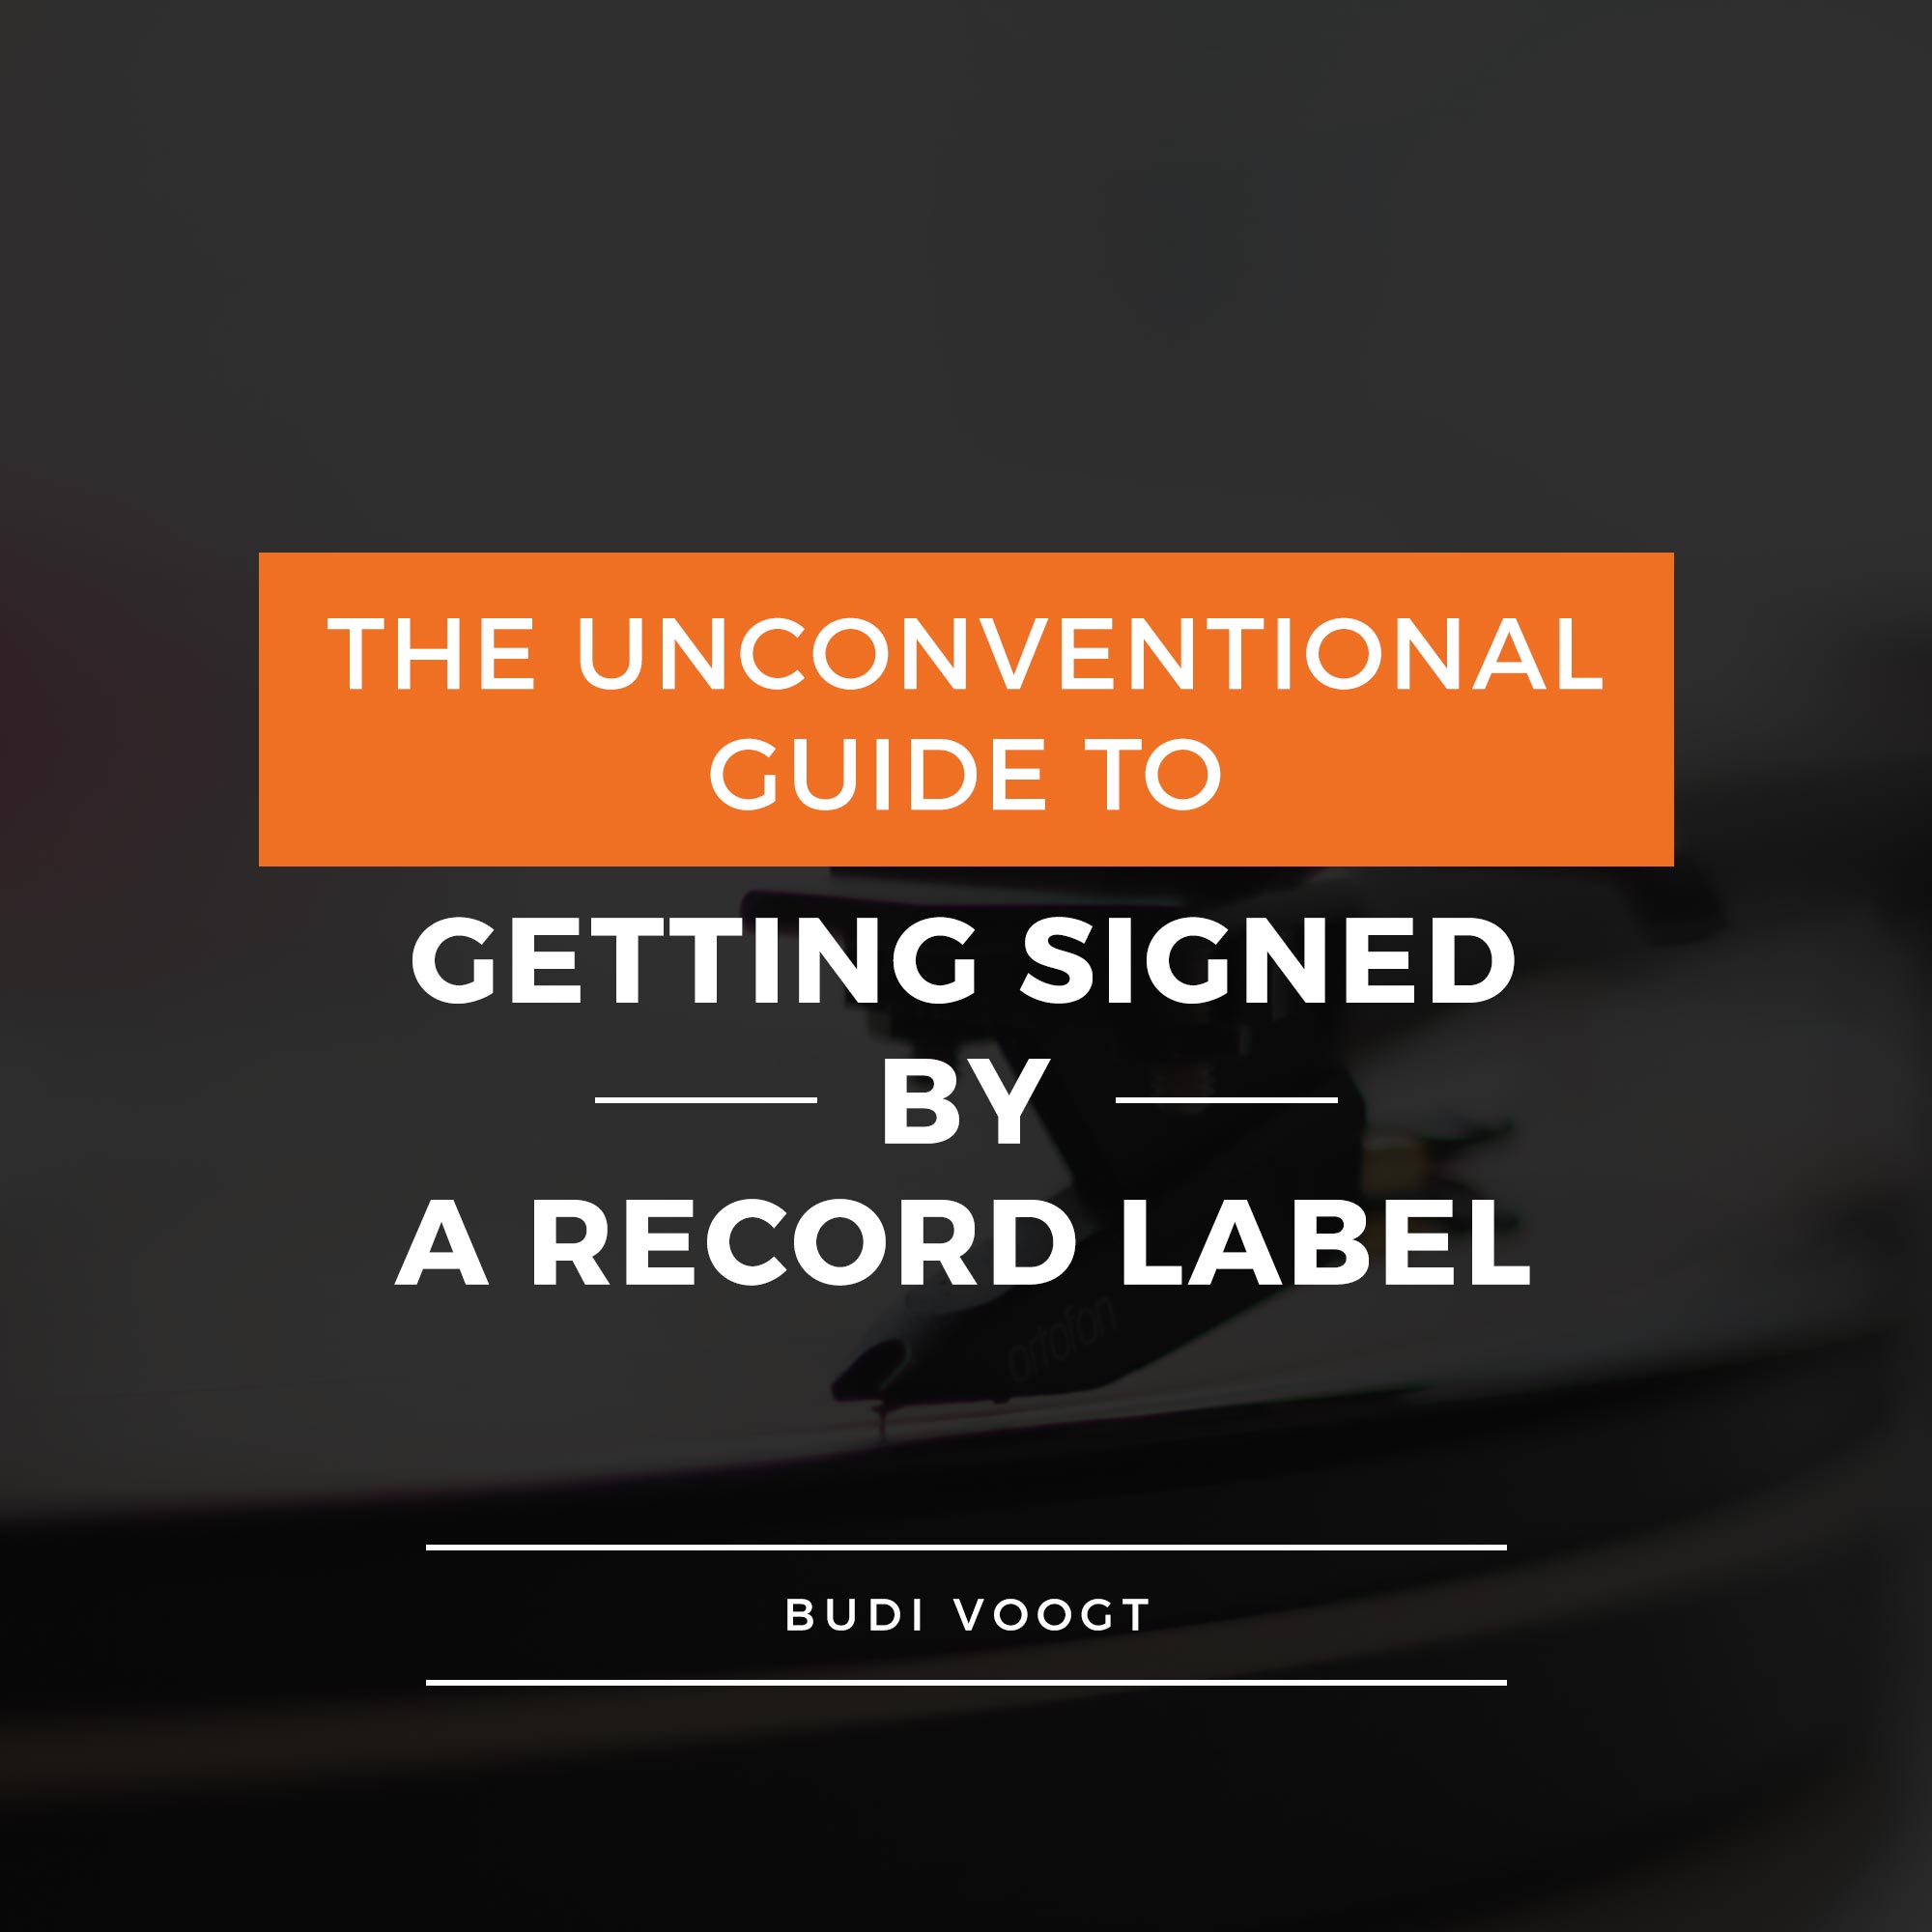 The Unconventional Guide to Getting Signed by a Record Label